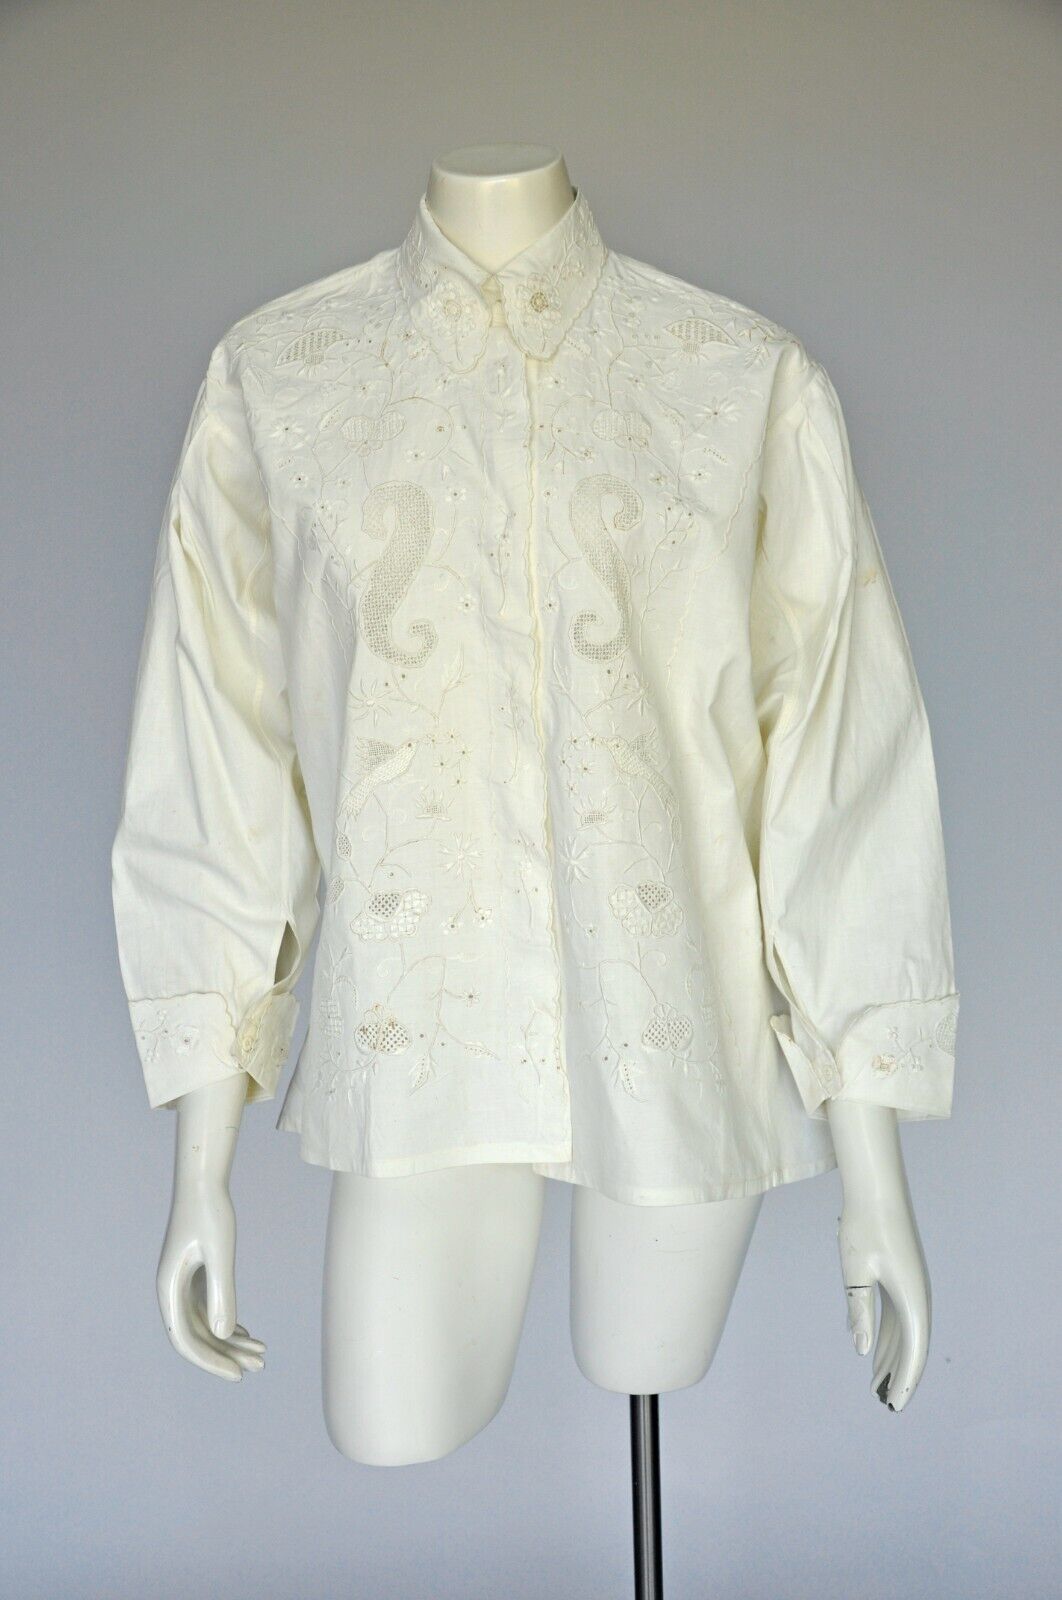 Antique teens 1900s 1920s White Hand Embroidered Linen Heirloom Shirt Blouse S-L